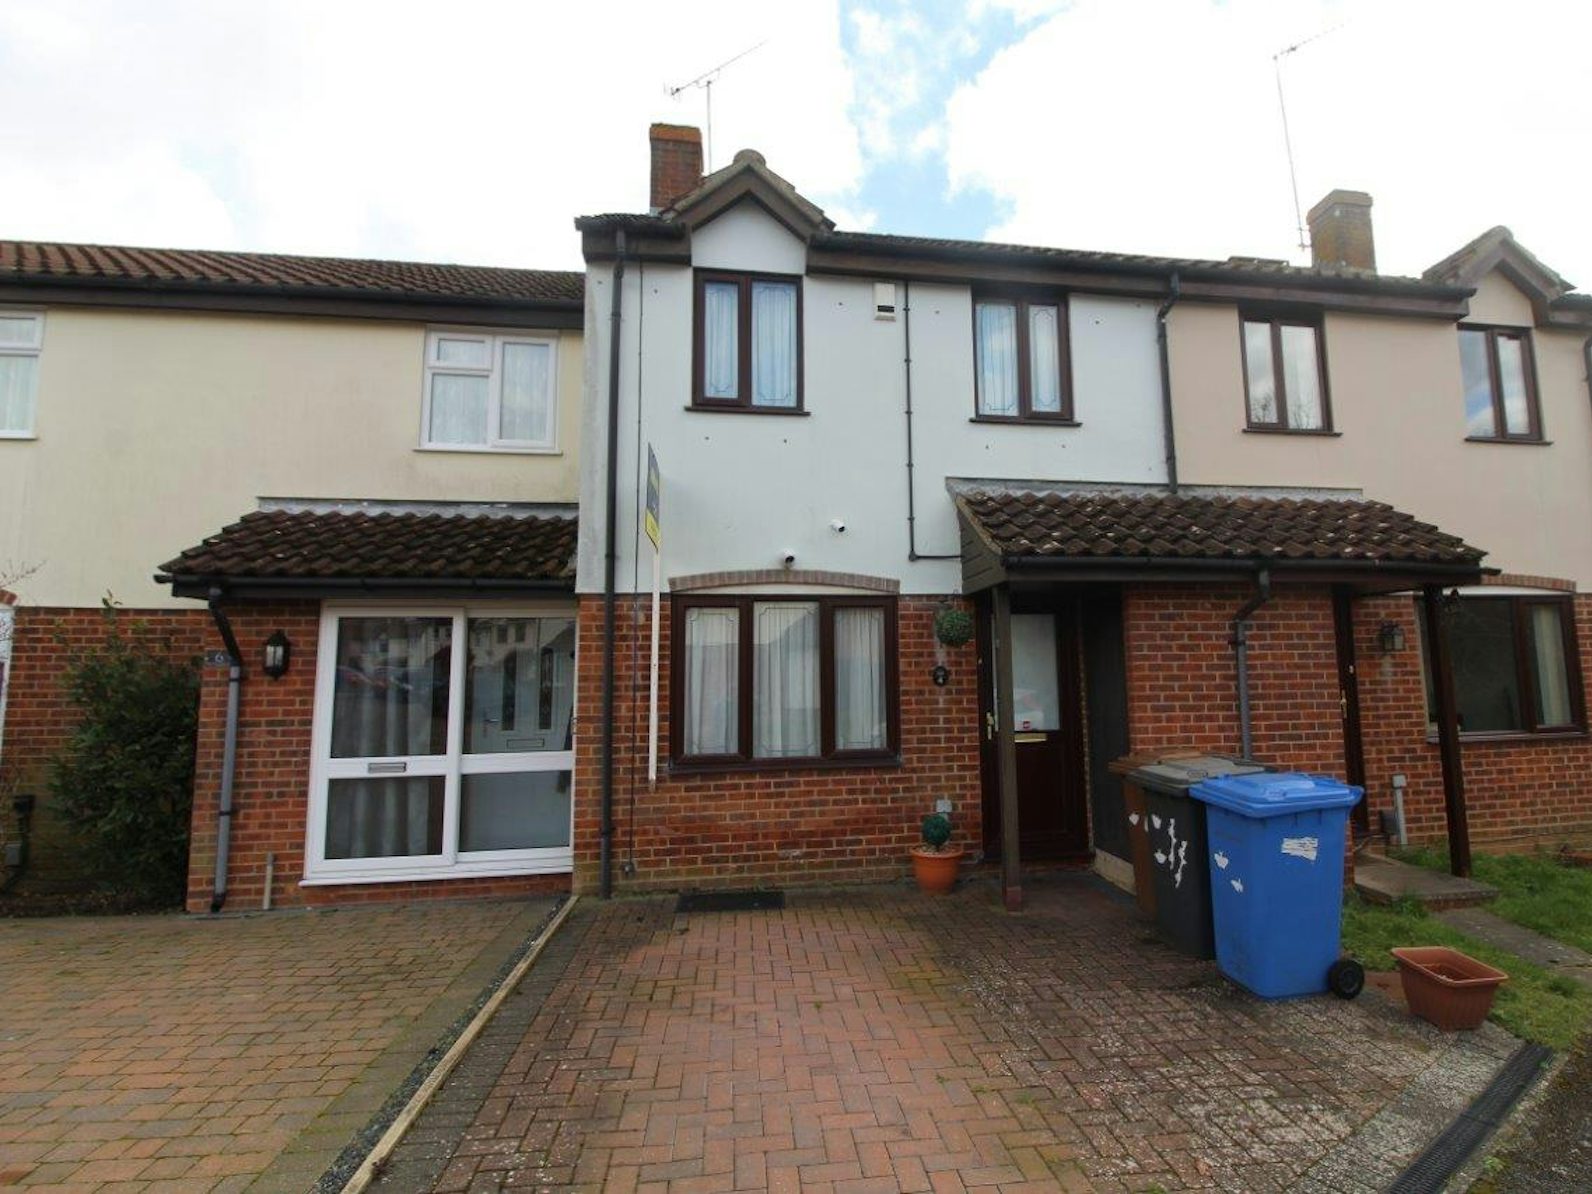 Terraced House for sale on Foden Avenue Ipswich, IP1